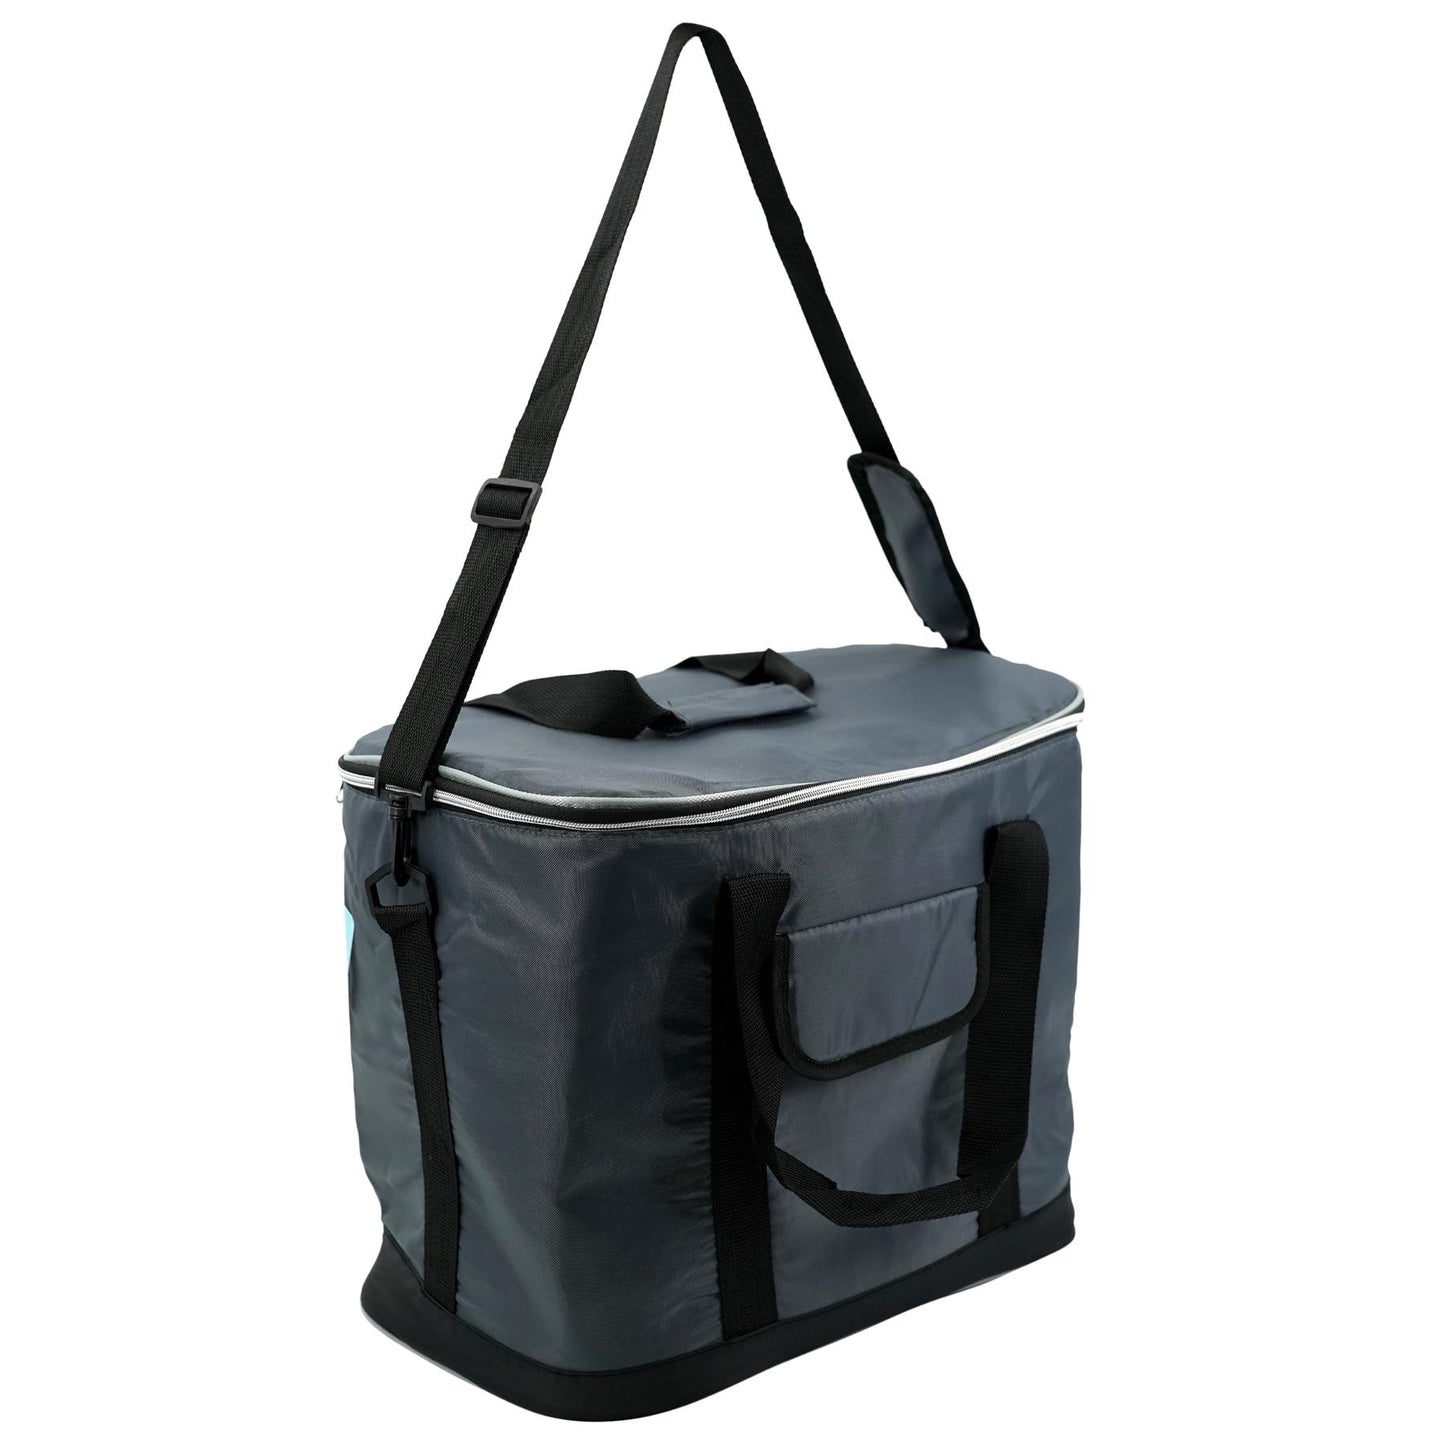 EXTRA LARGE 30 LITRE 60 CAN INSULATED COOLER COOL BAG COLLAPSIBLE PICNIC  CAMPING